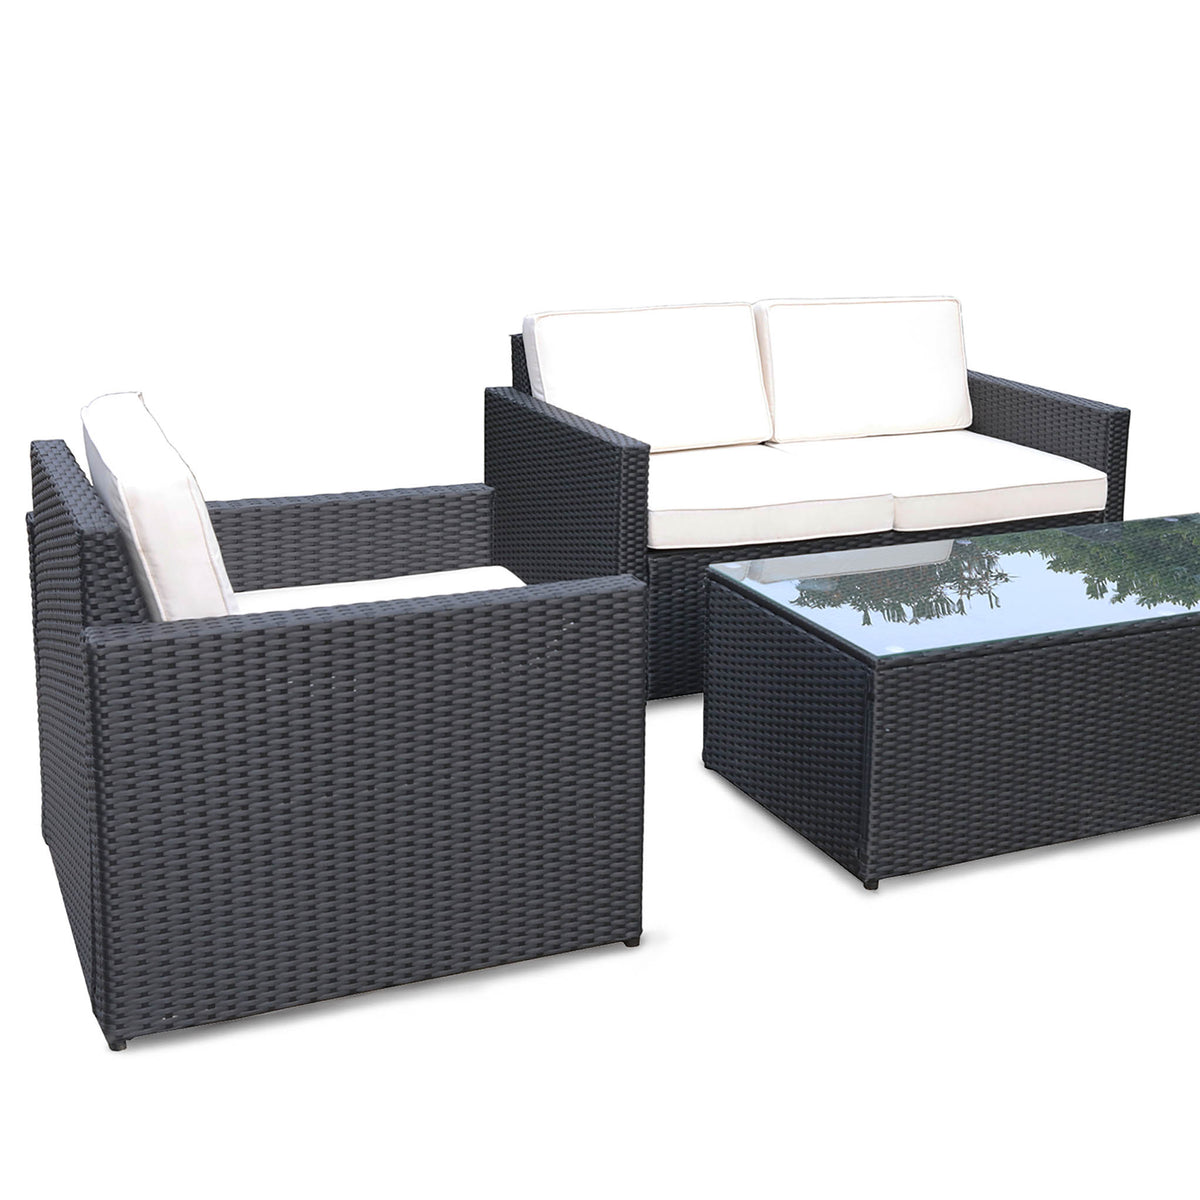 Berlin Black Rattan 4 Seater Sofa Lounge Set with Coffee Table with amrchairs